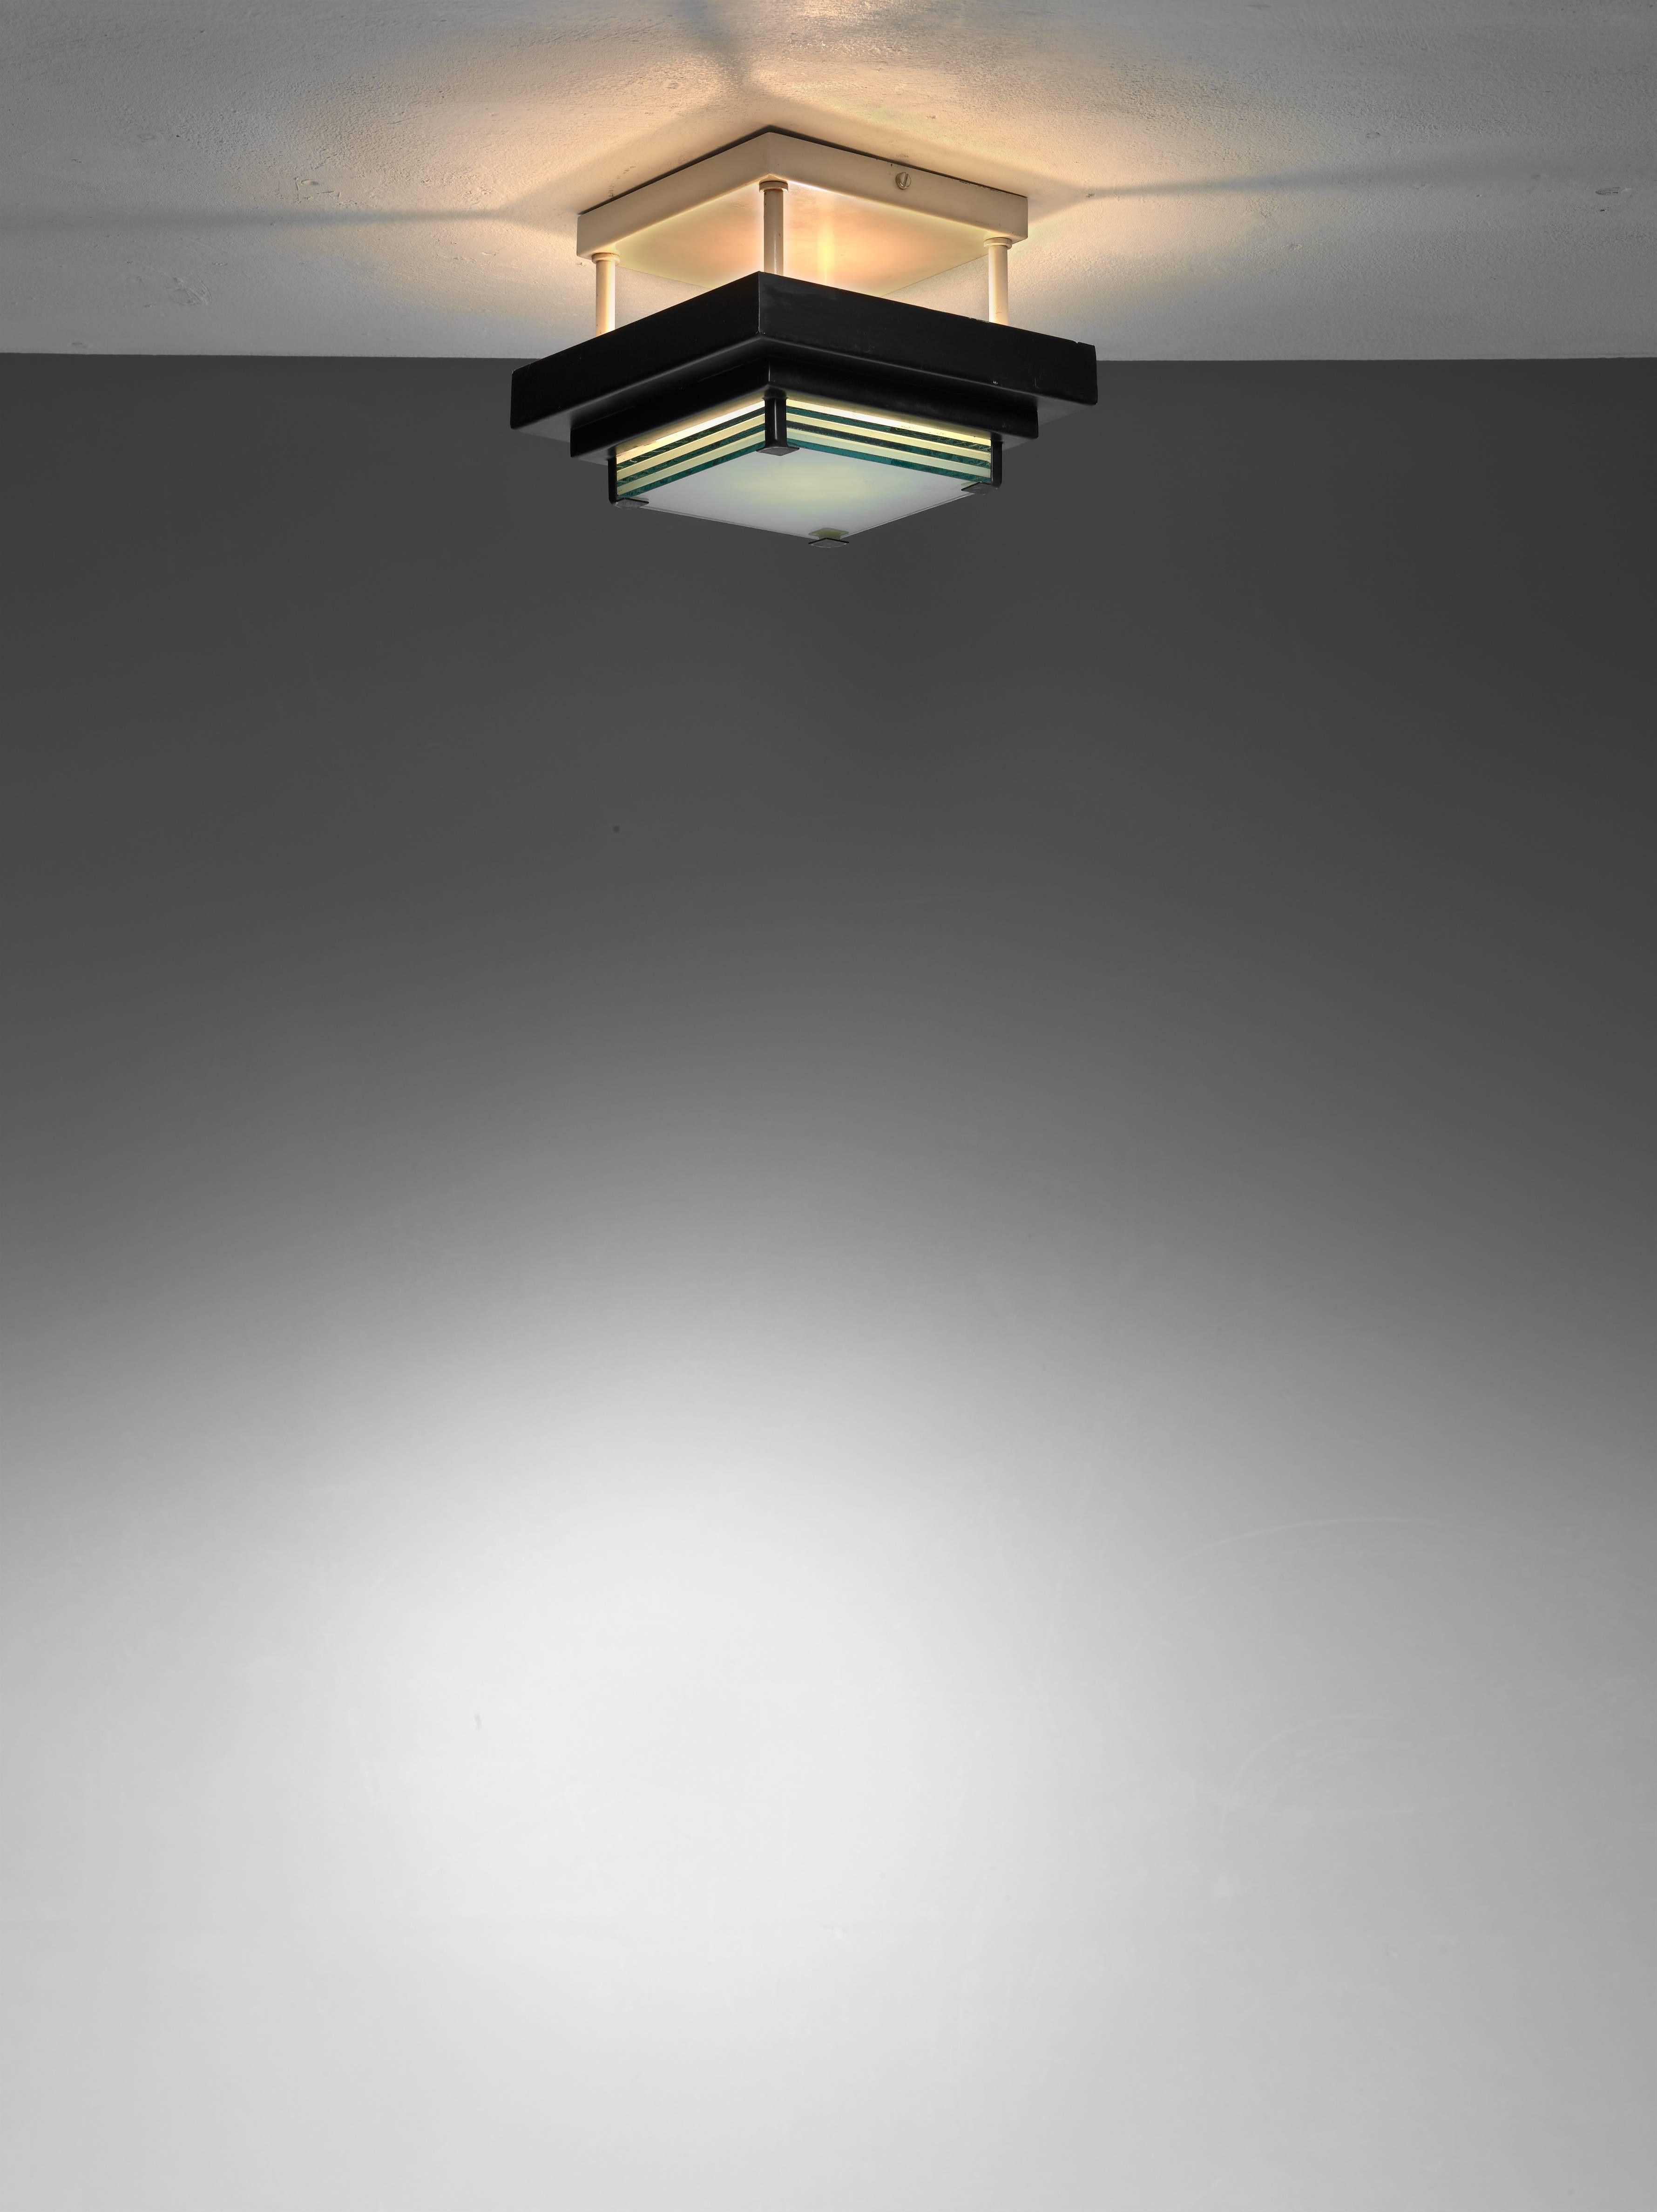 A French midcentury flush mount ceiling lamp. The lamp is made of a black and white metal frame, holding six blueish glass plates that diffuse the light.

A very simple and modernist design in the manner of Arlus and Jean Perzel.